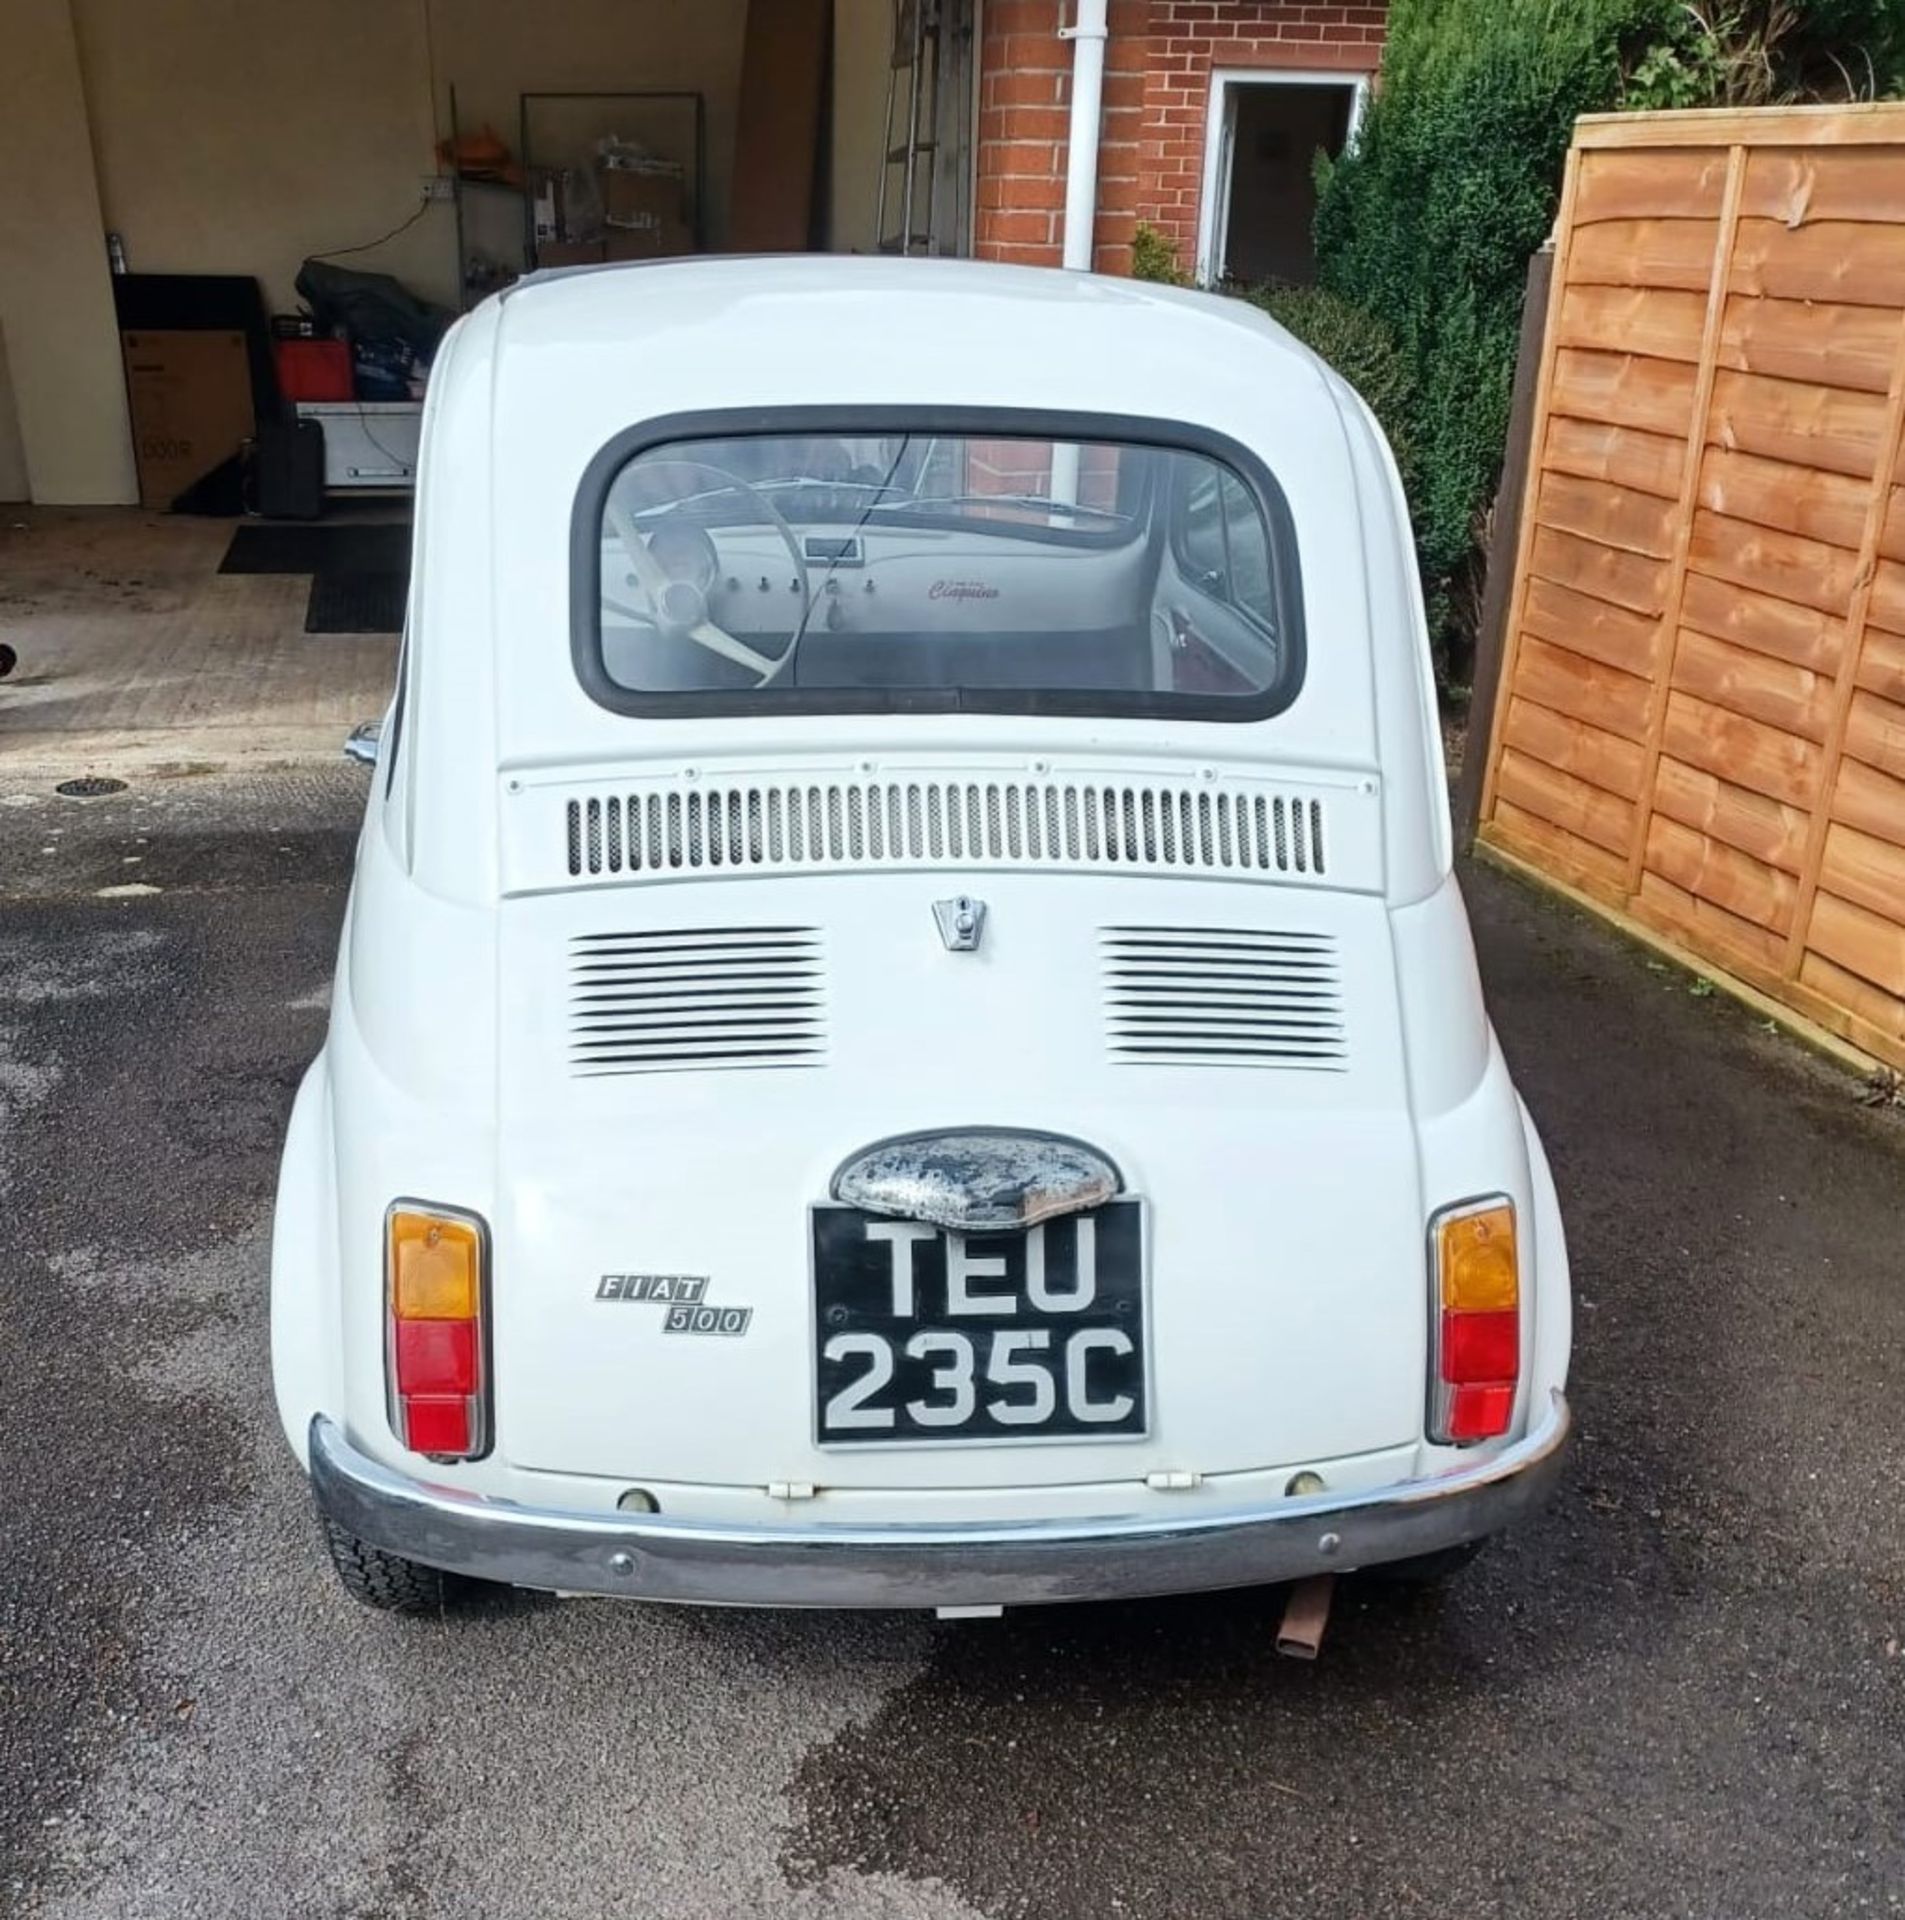 1965 FIAT 500F SALOON Registration Number: TEU 235C Chassis Number: 110F0954214 Recorded Mileage: - Image 6 of 15